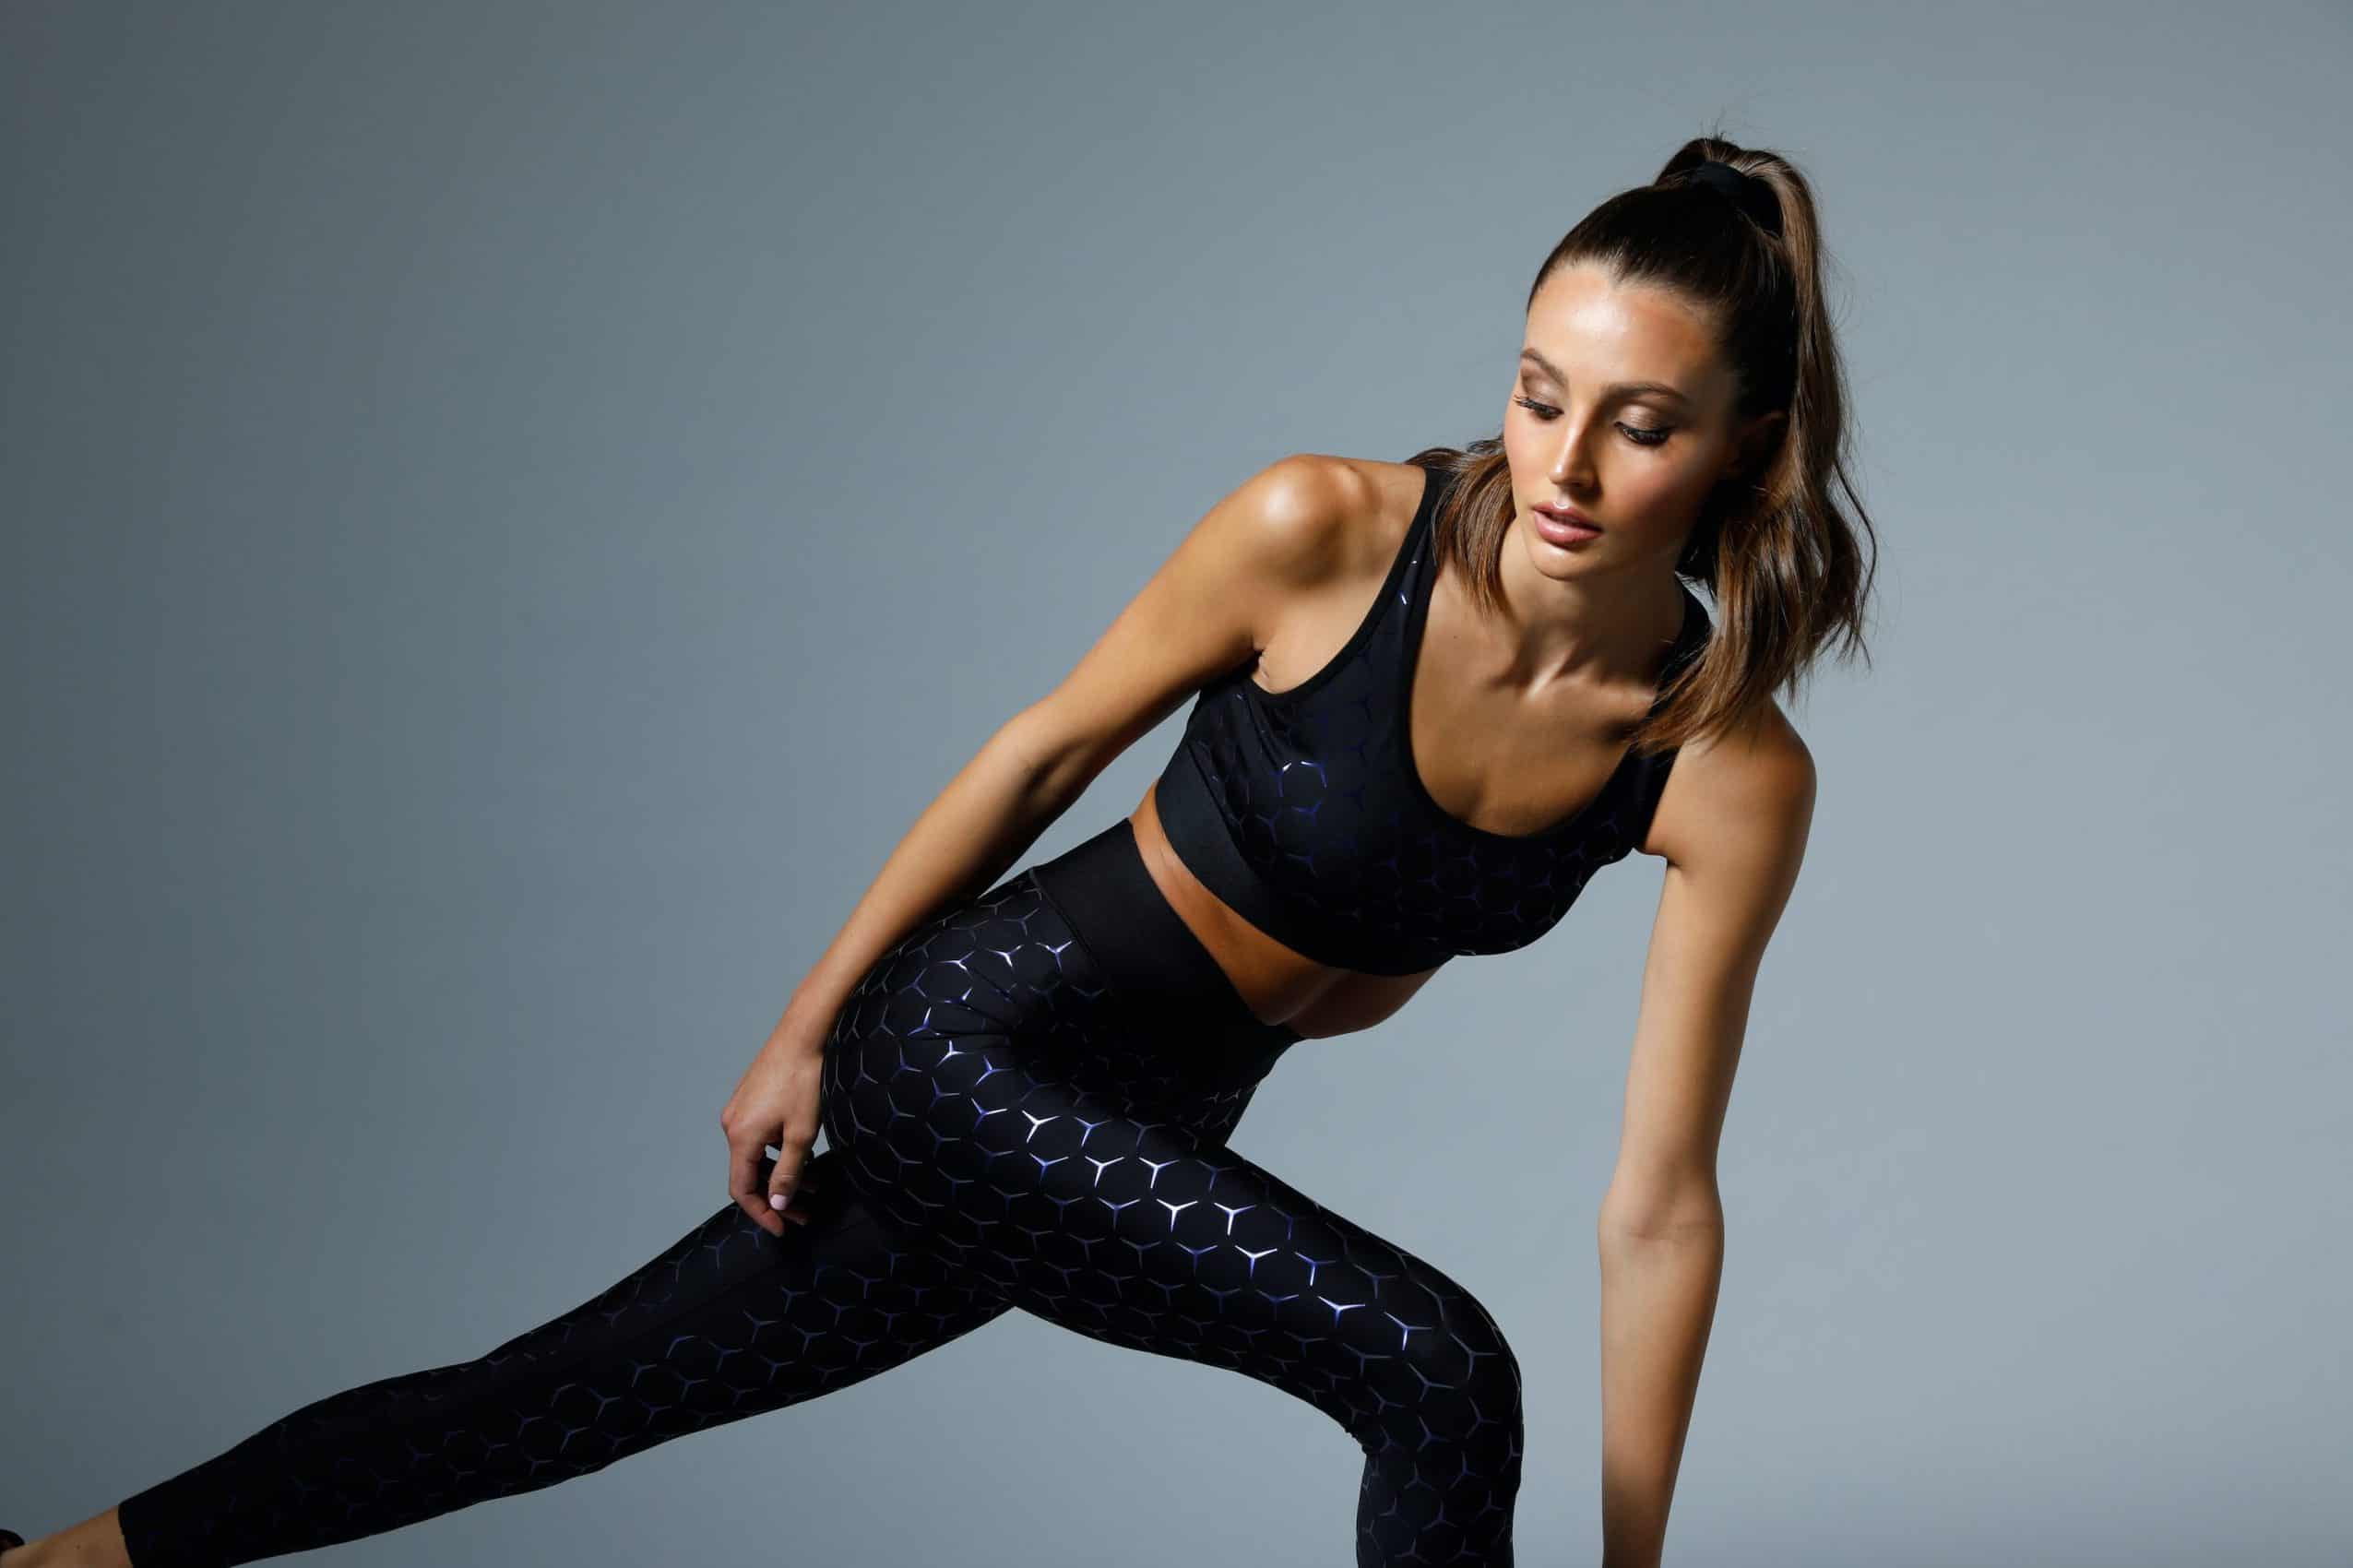 Ultracor's New Hypersonic Legging Helps Burn More Calories - Daily Front Row